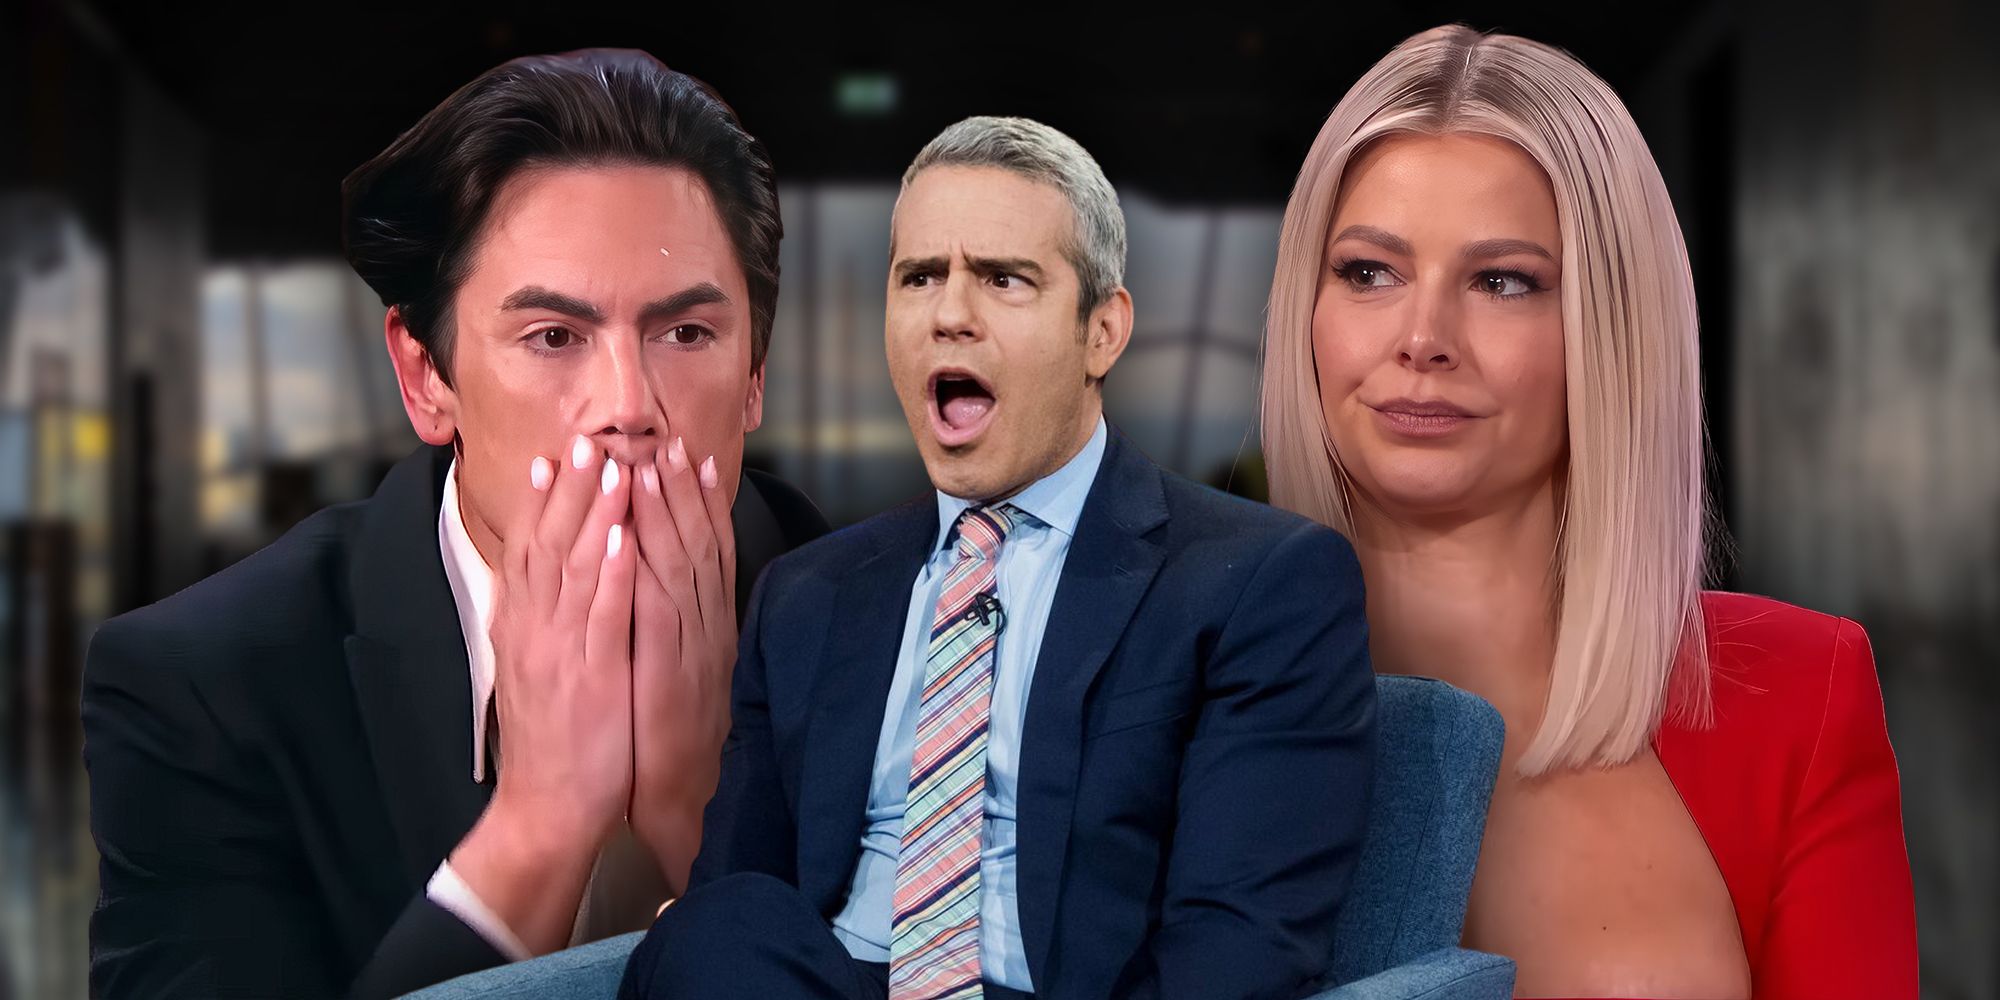 Tom Sandoval, Andy Cohen, Ariana Madix during Vanderpump Rules reunion